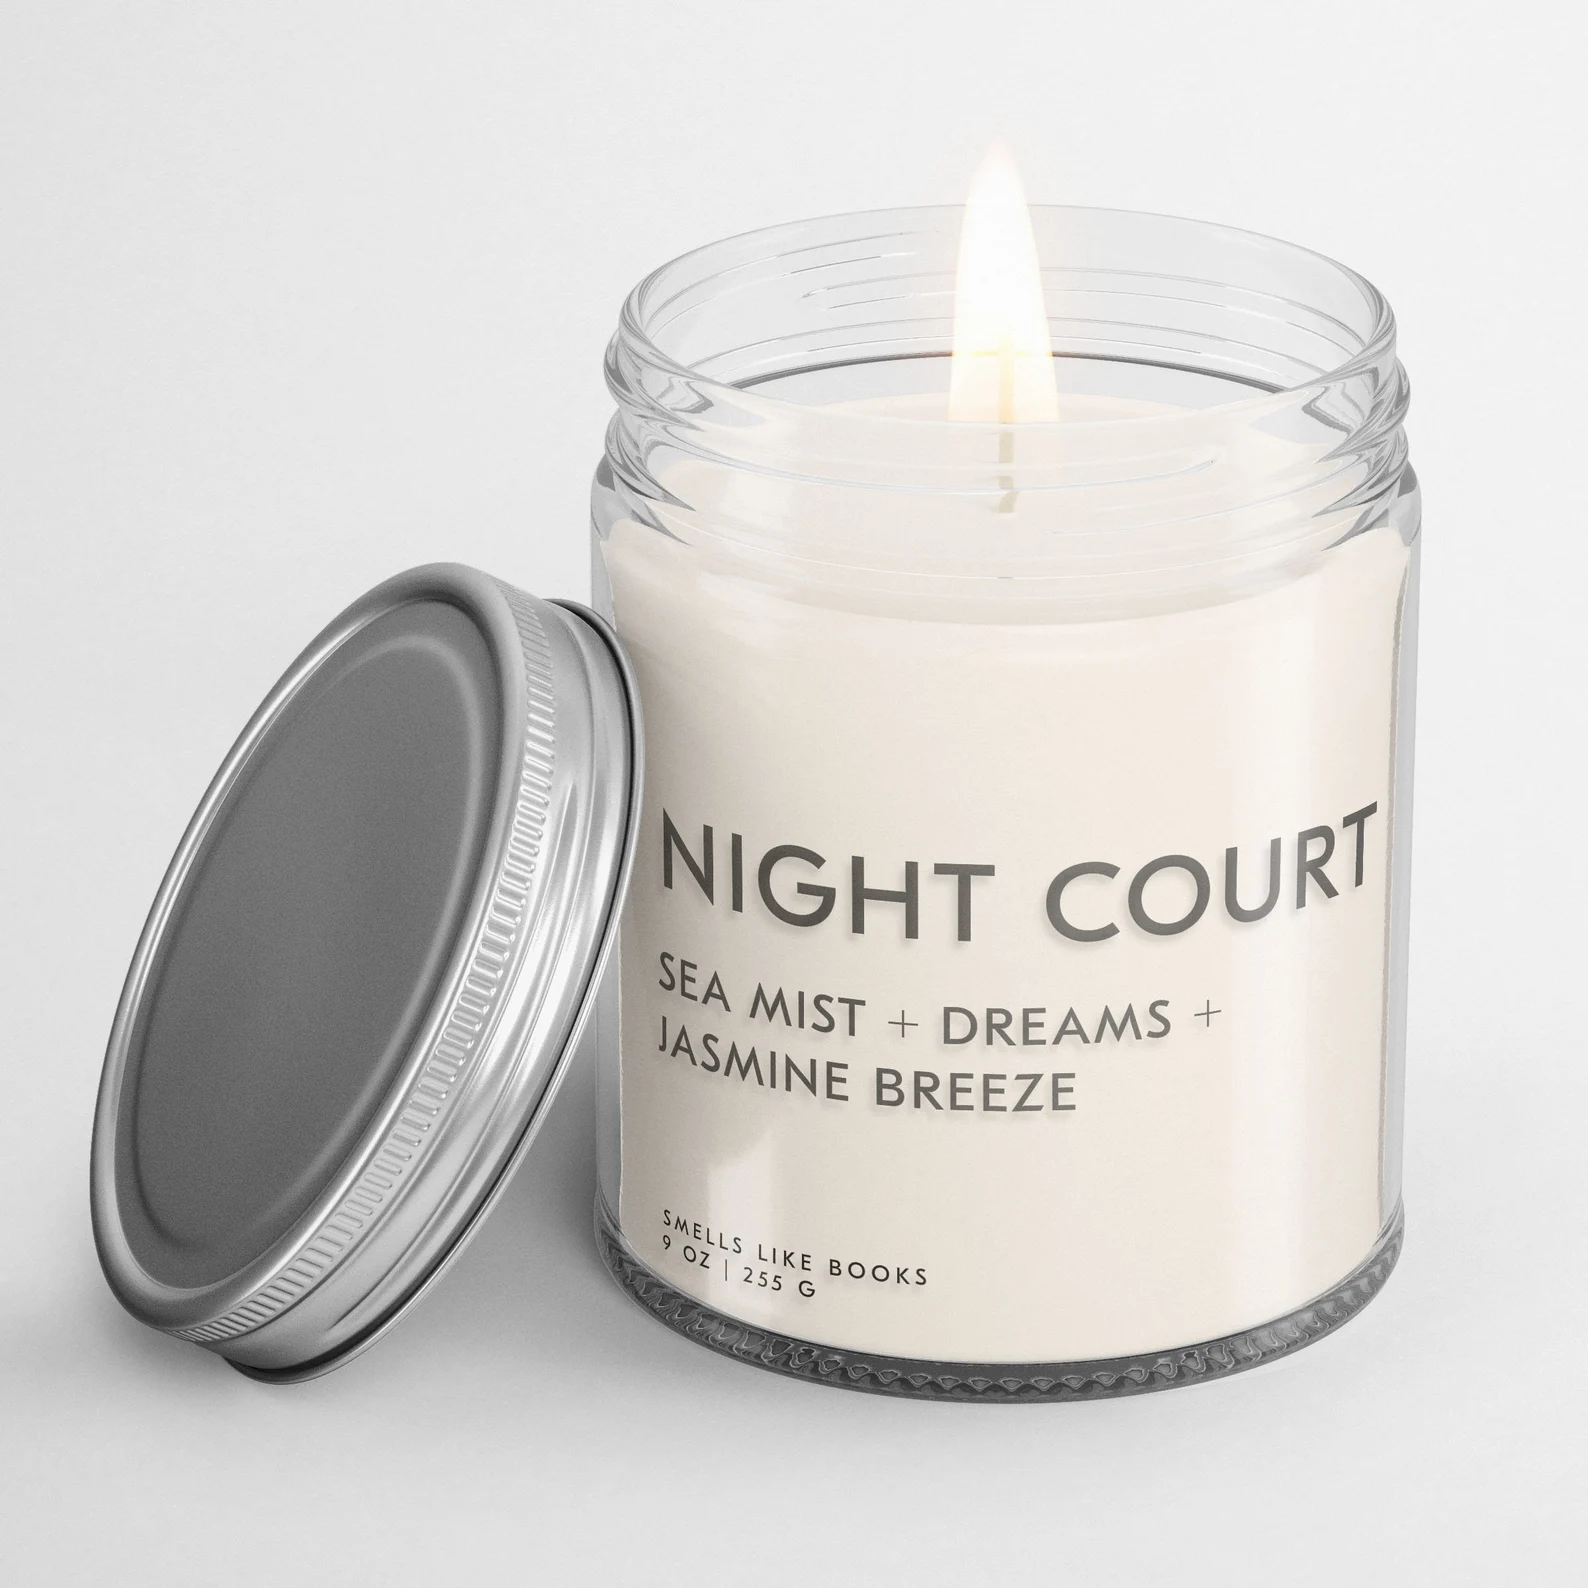 A photo of a white jar candle with a silver top that reads night court sea mist plus dreams plus jasmine breeze in gray lettering. The candle is staged on a white background.